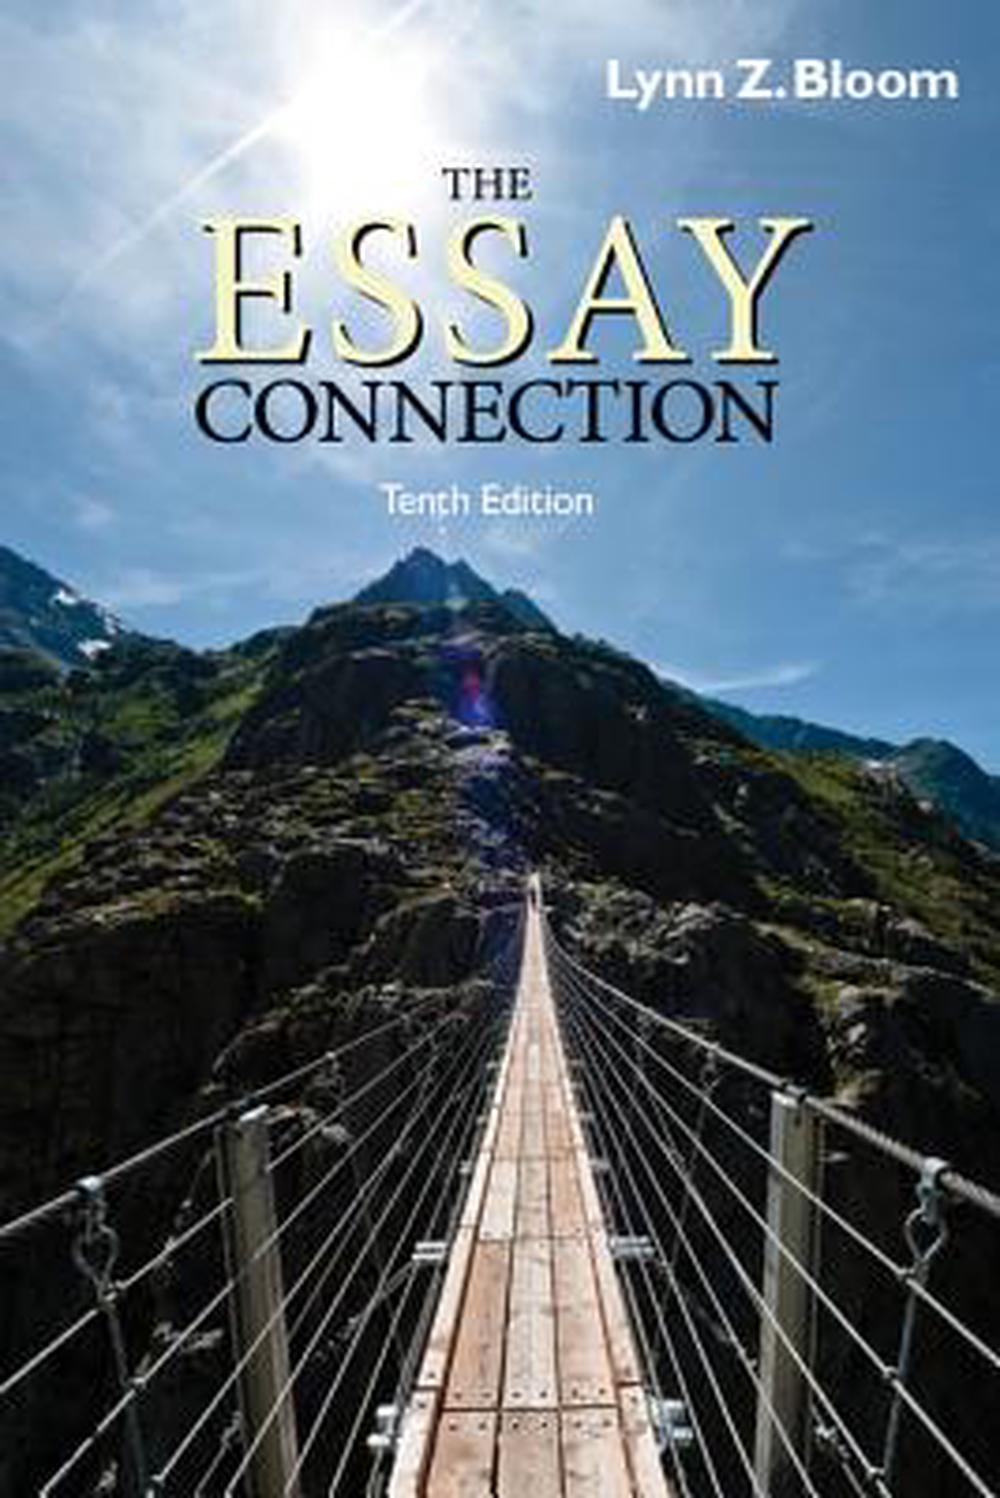 The Essay Connection by Lynn Z. Bloom, Paperback, 9780840030078 Buy